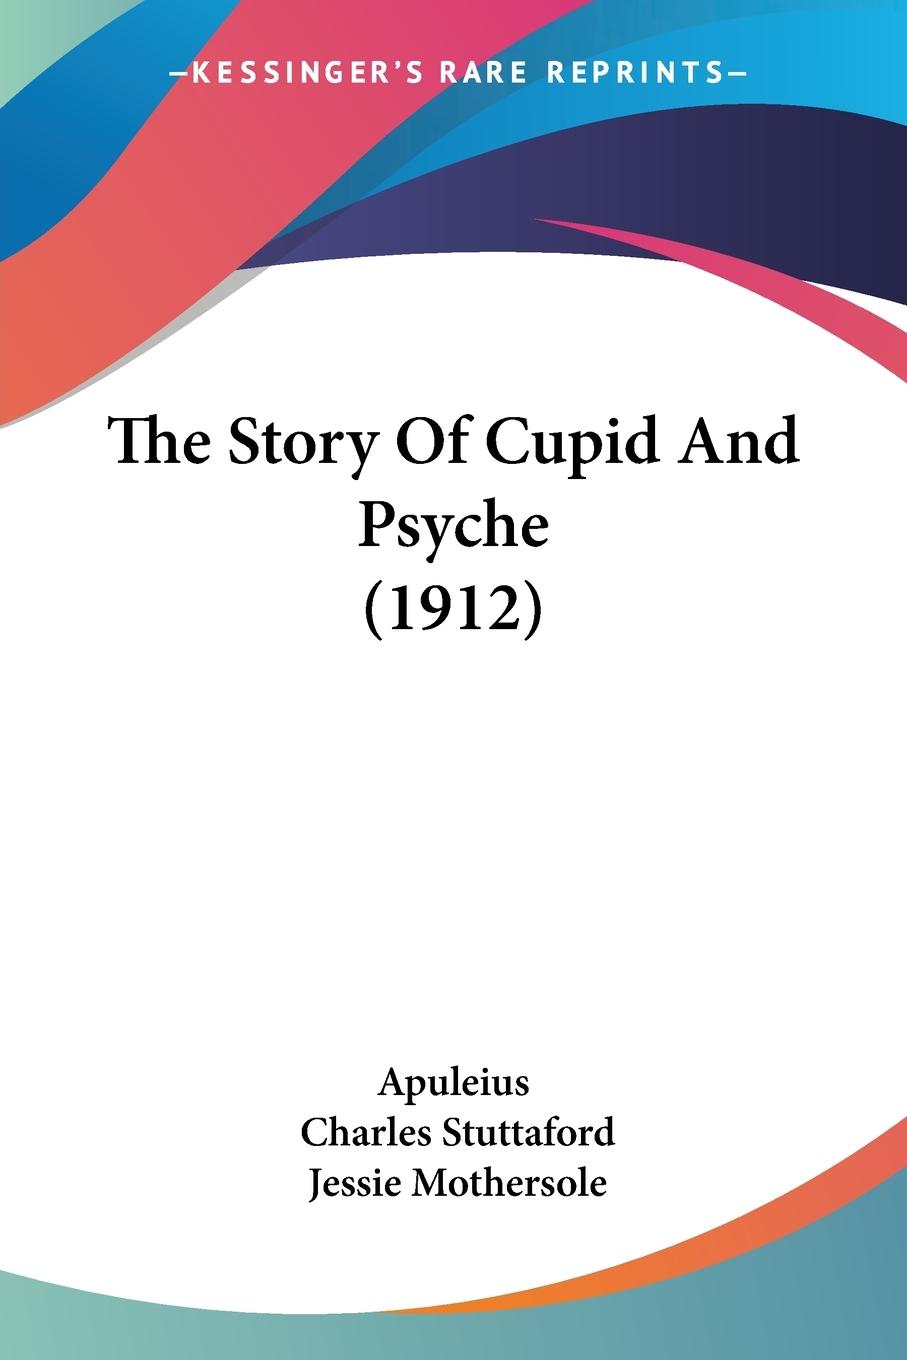 The Story Of Cupid And Psyche (1912) - Apuleius